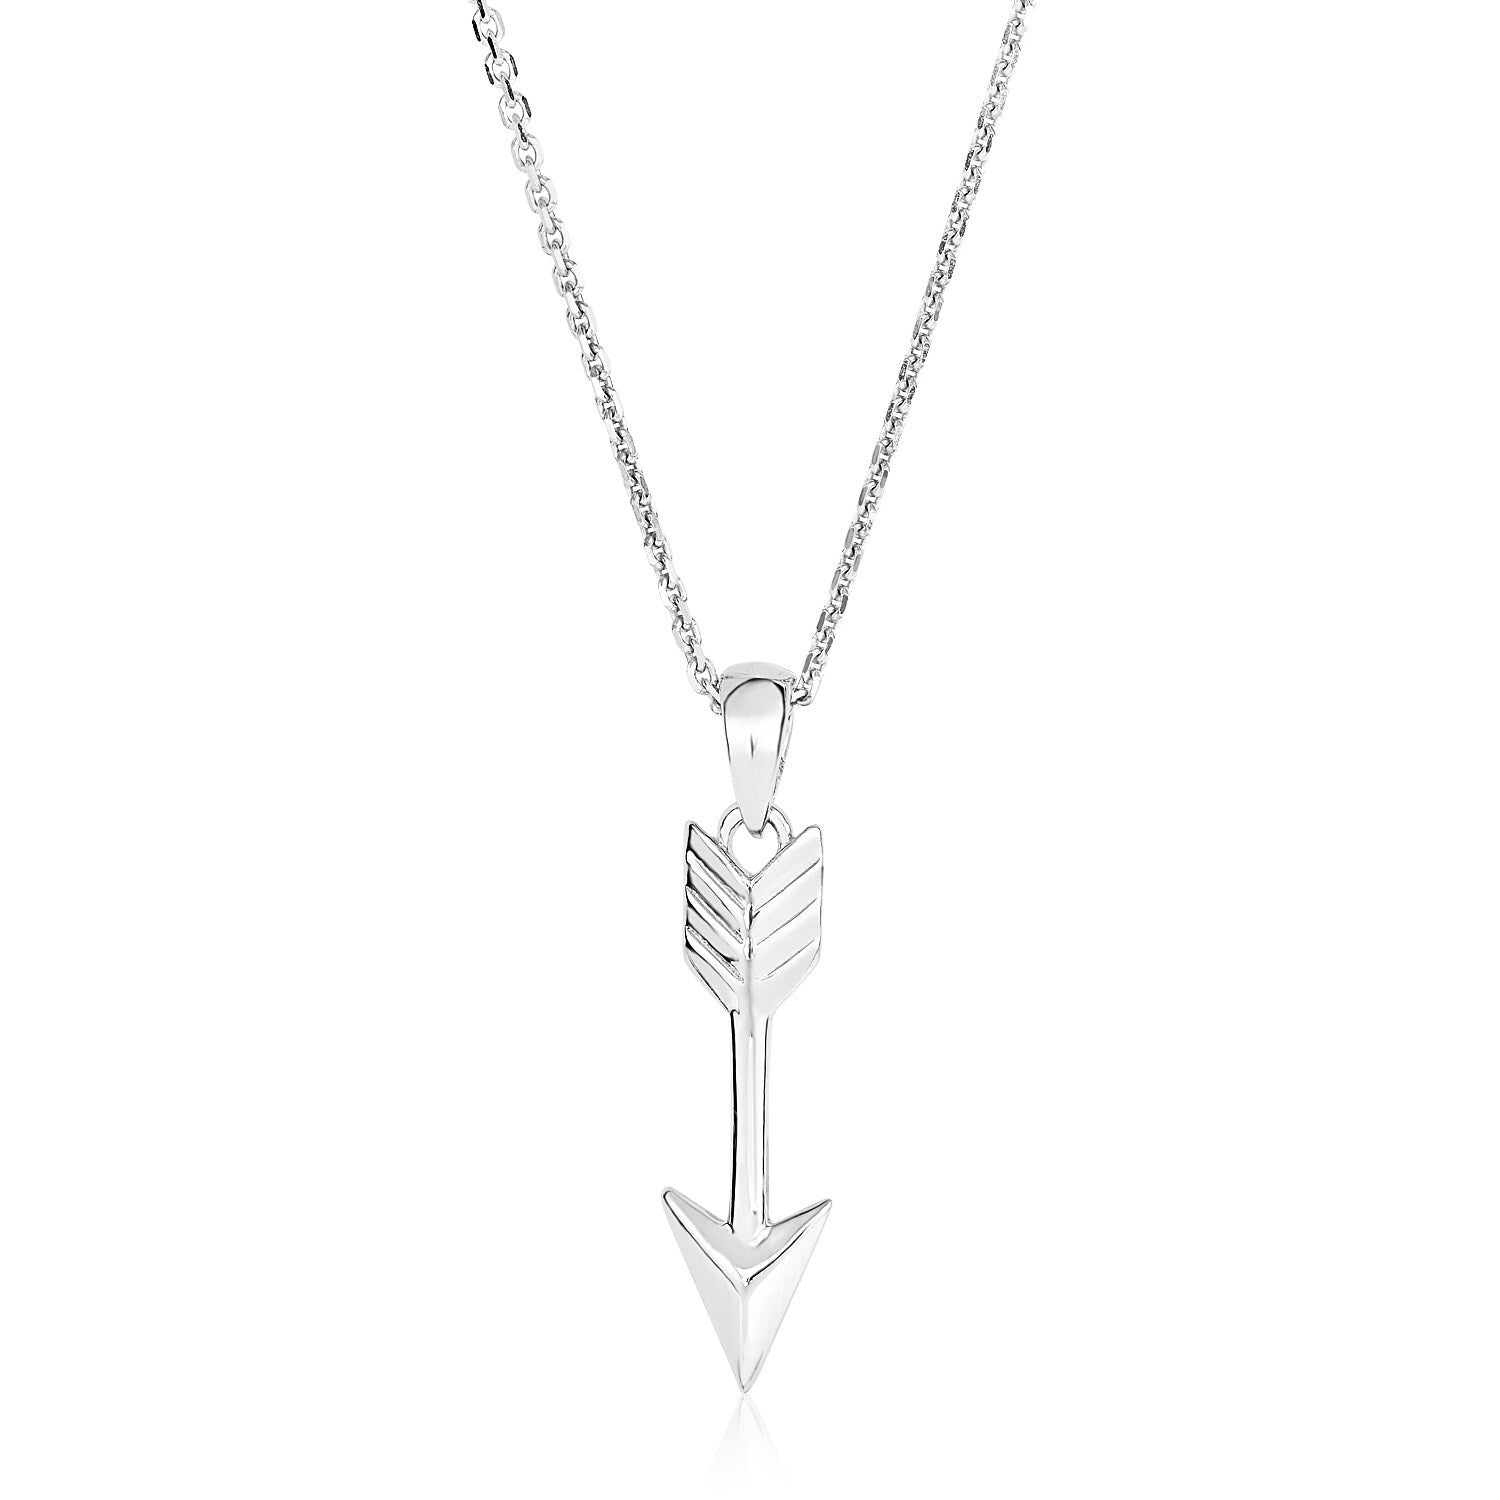 Sterling Silver 18 inch Necklace with Arrow Pendant, size 18''